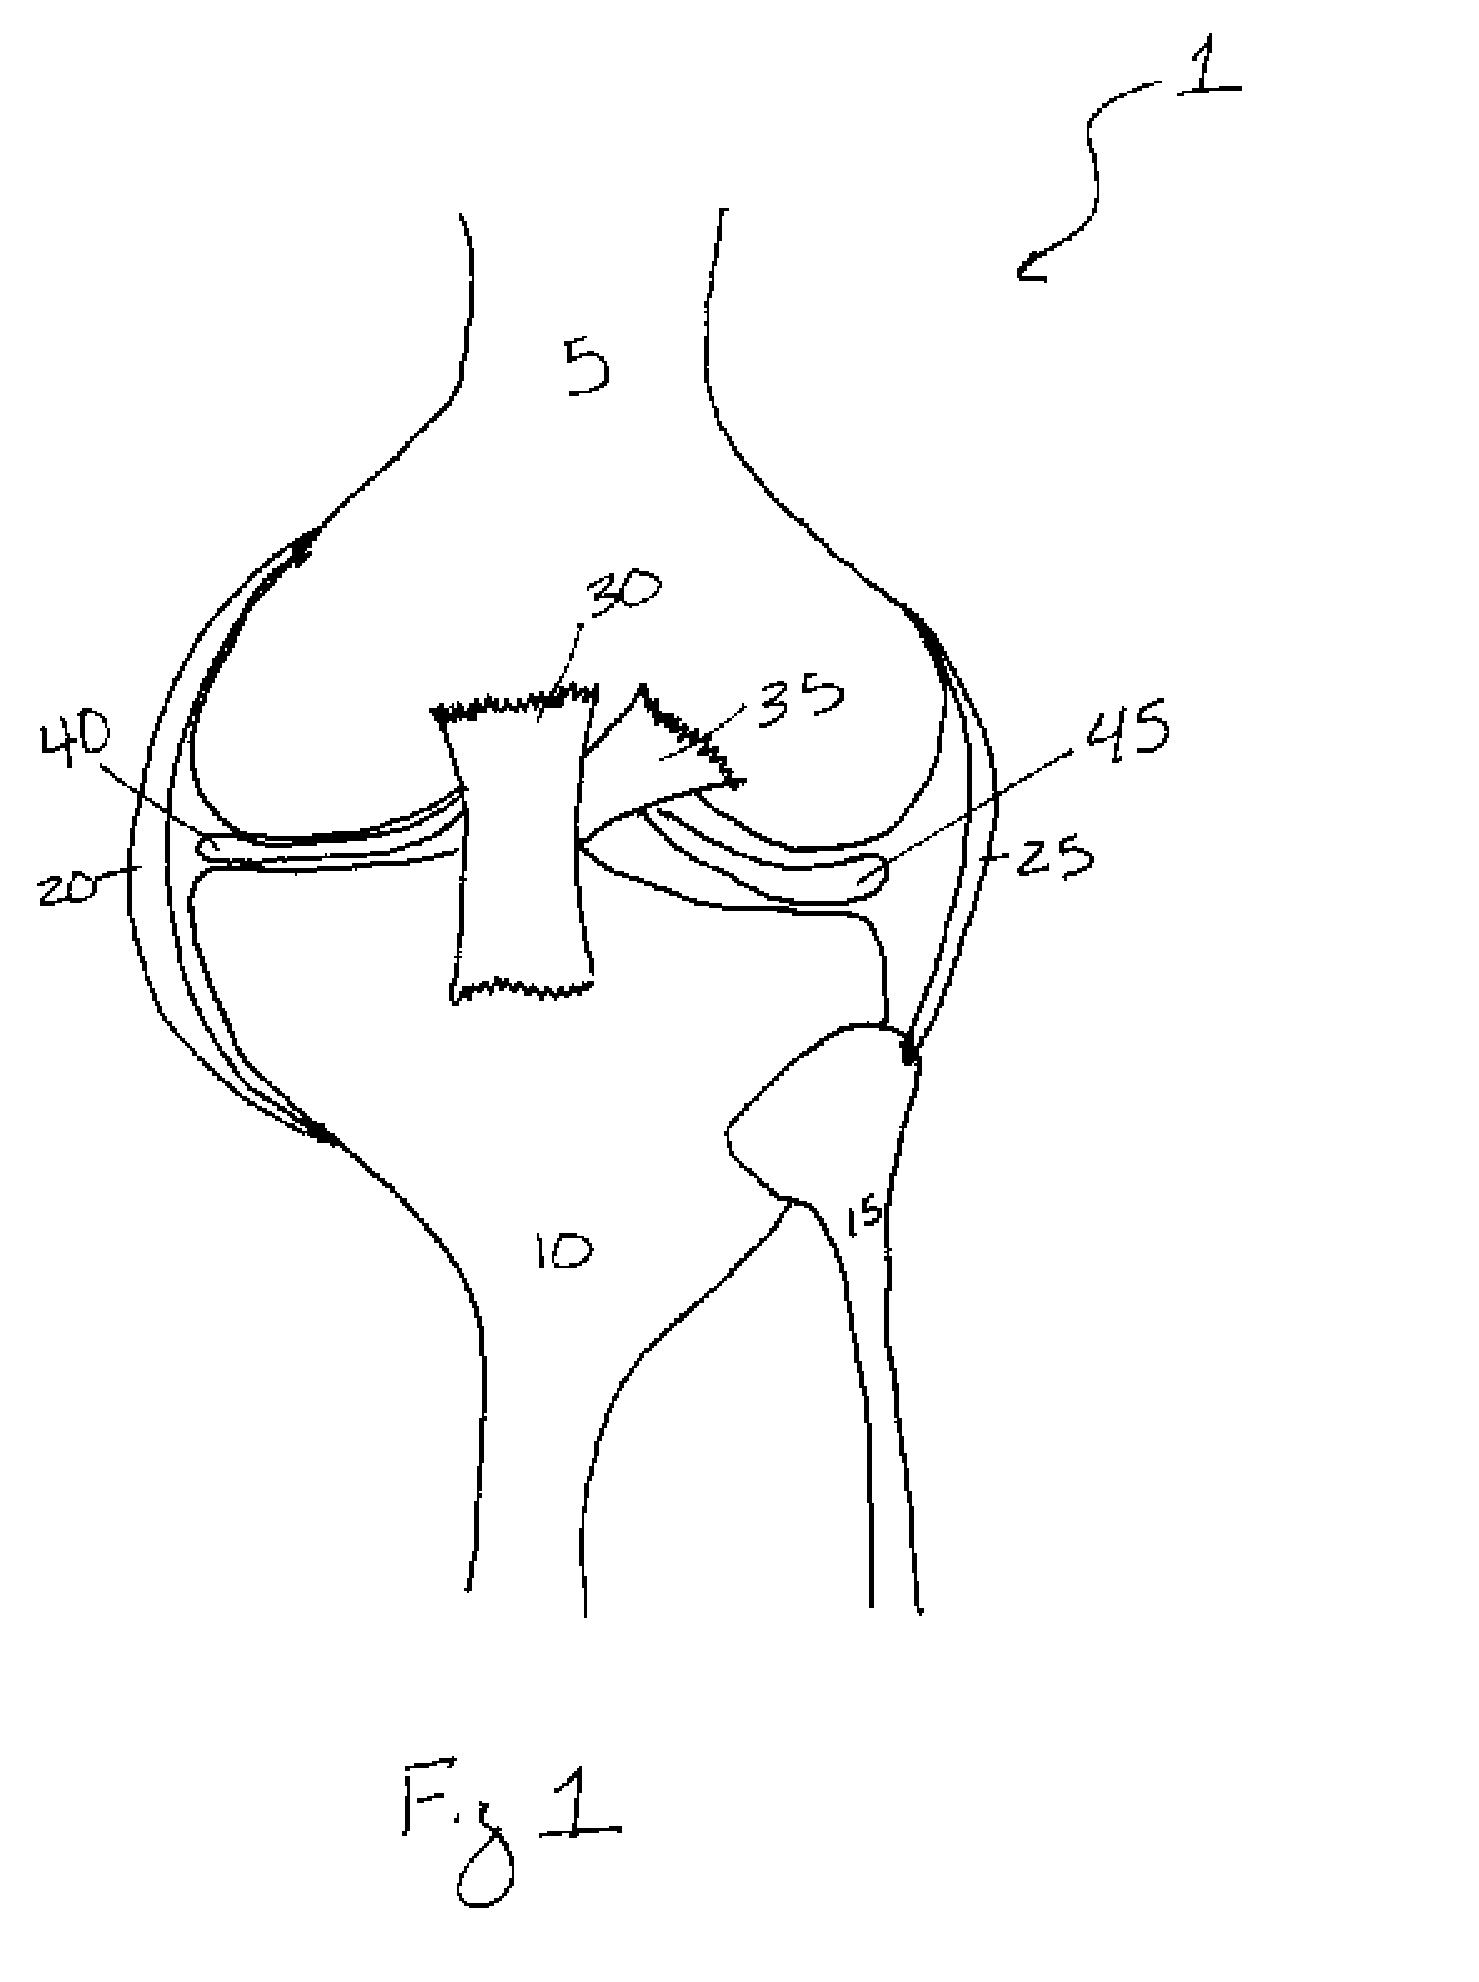 Methods of treating a trauma or disorder of the knee joint by local administration and sustained-delivery of a biological agent